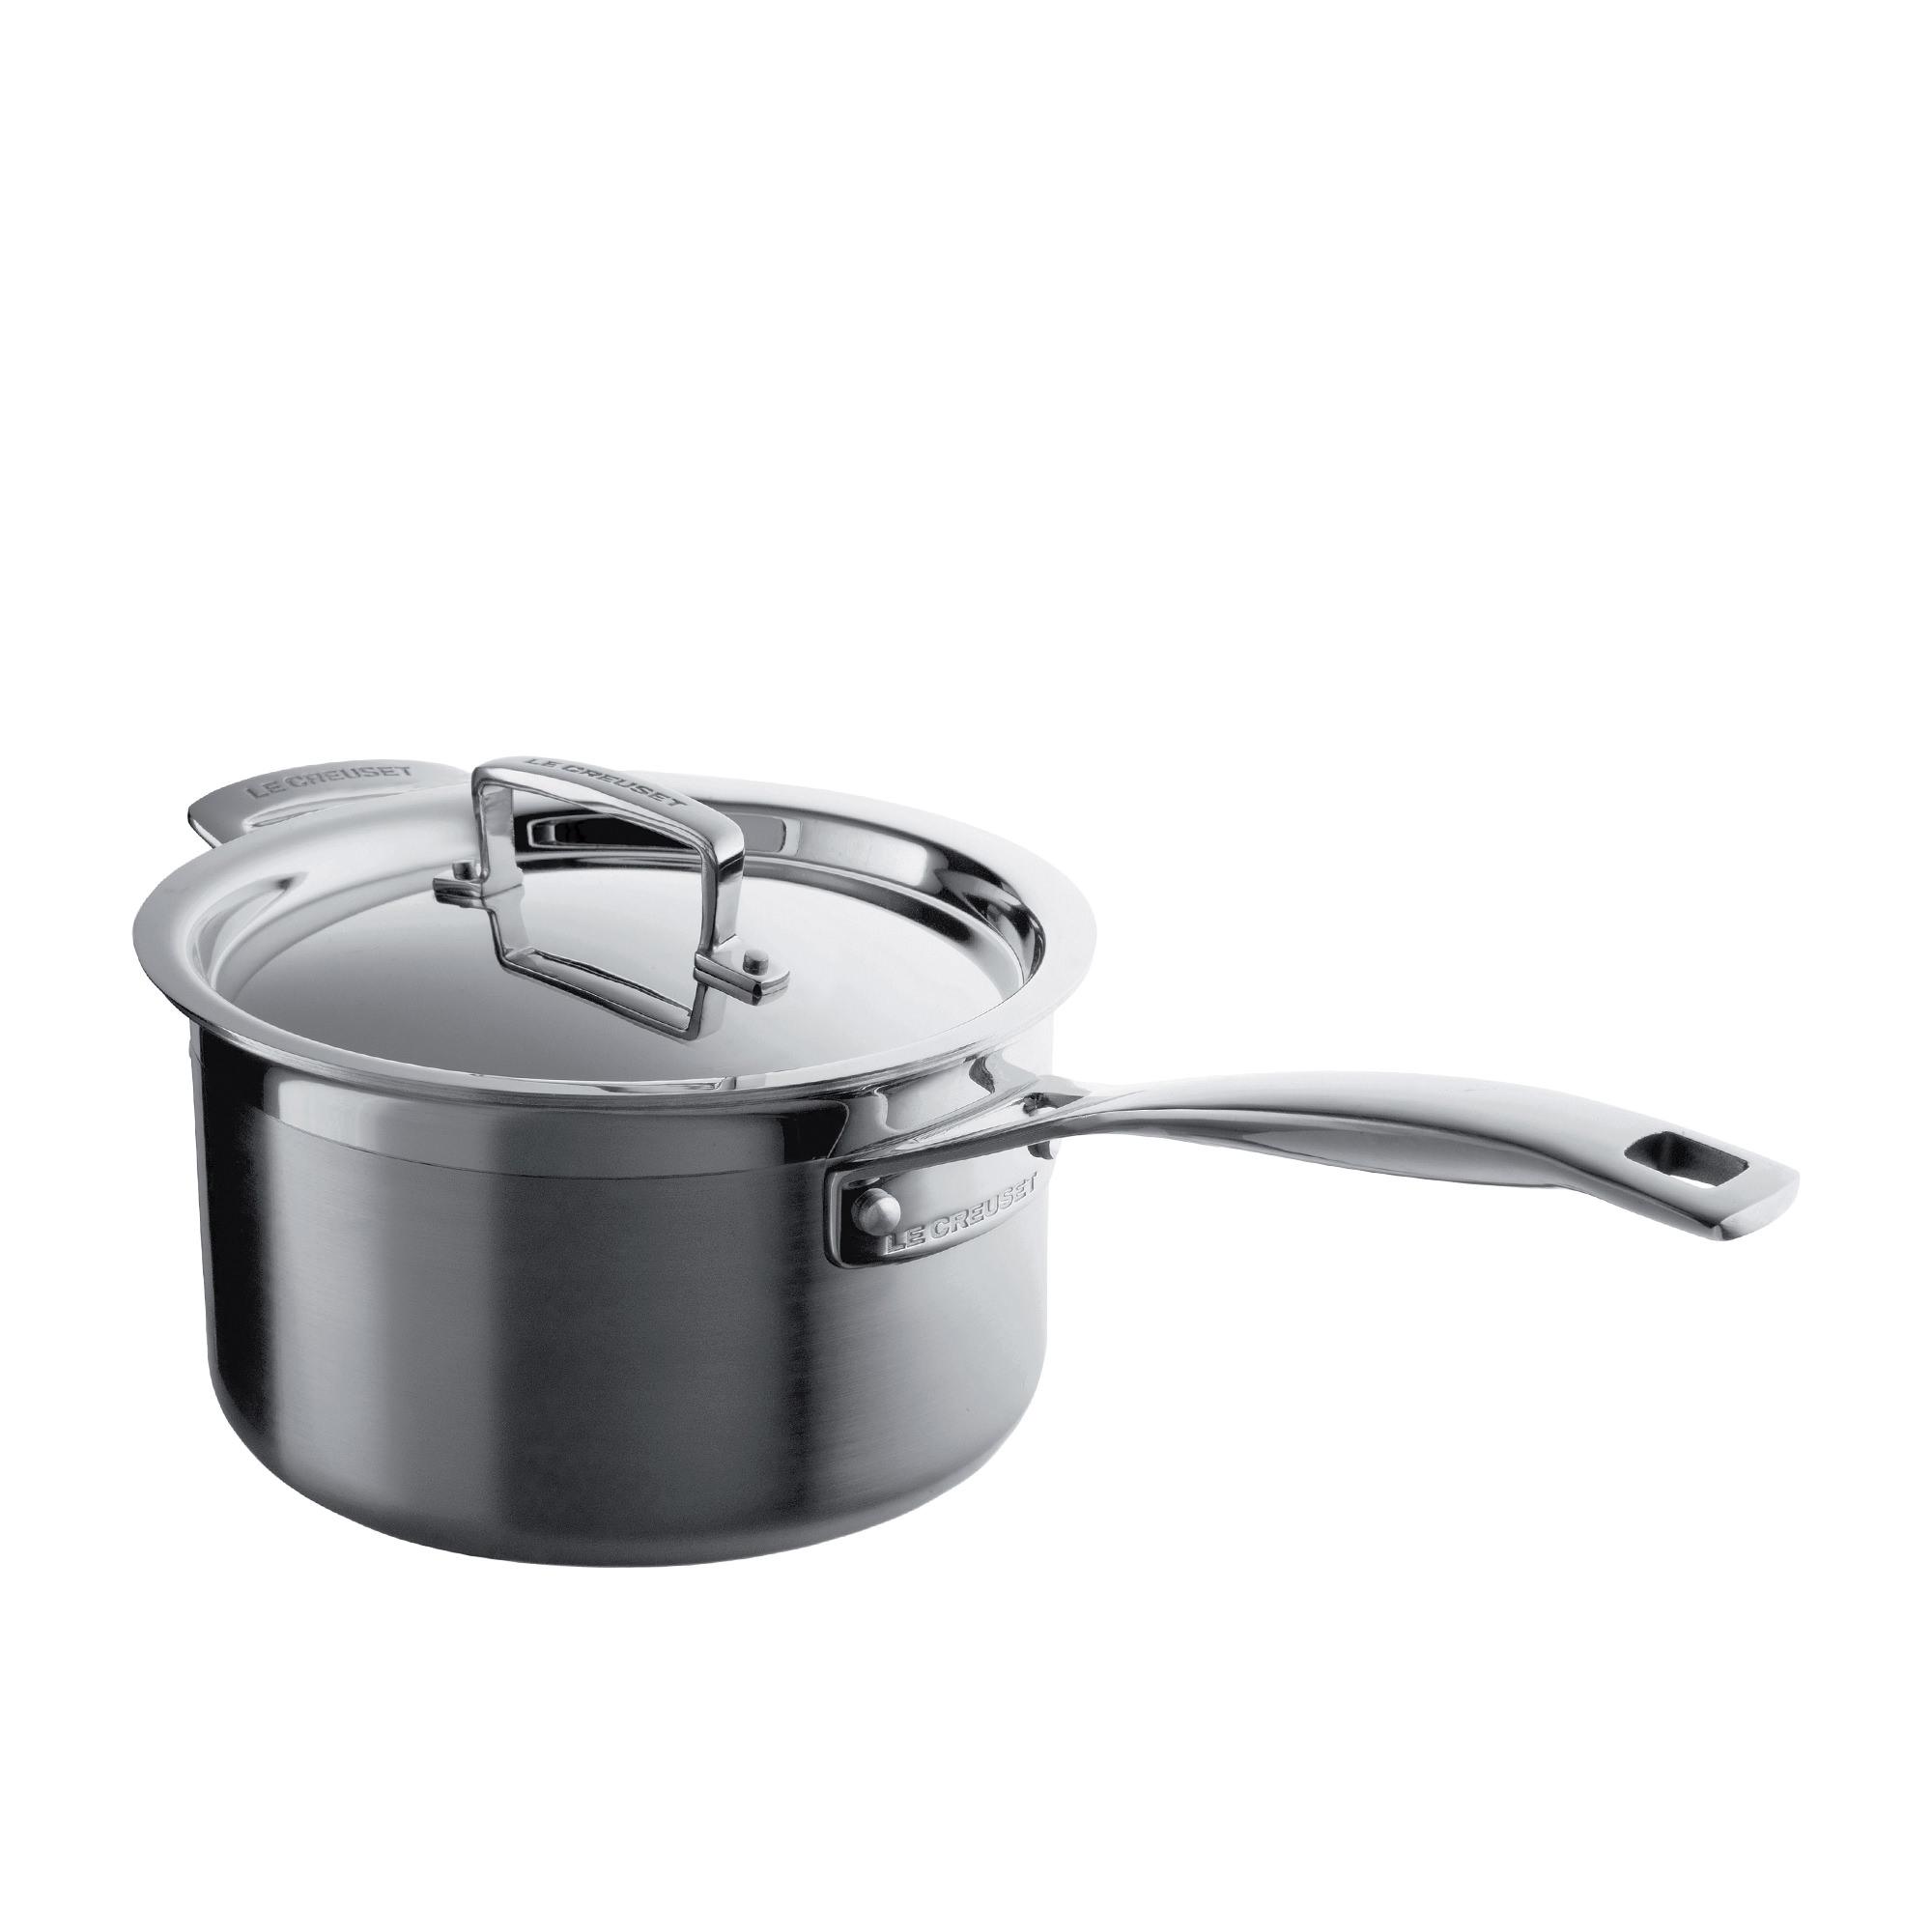 Le Creuset 3-Ply Stainless Steel Saucepan with Lid 20cm - 3.8L Image 3